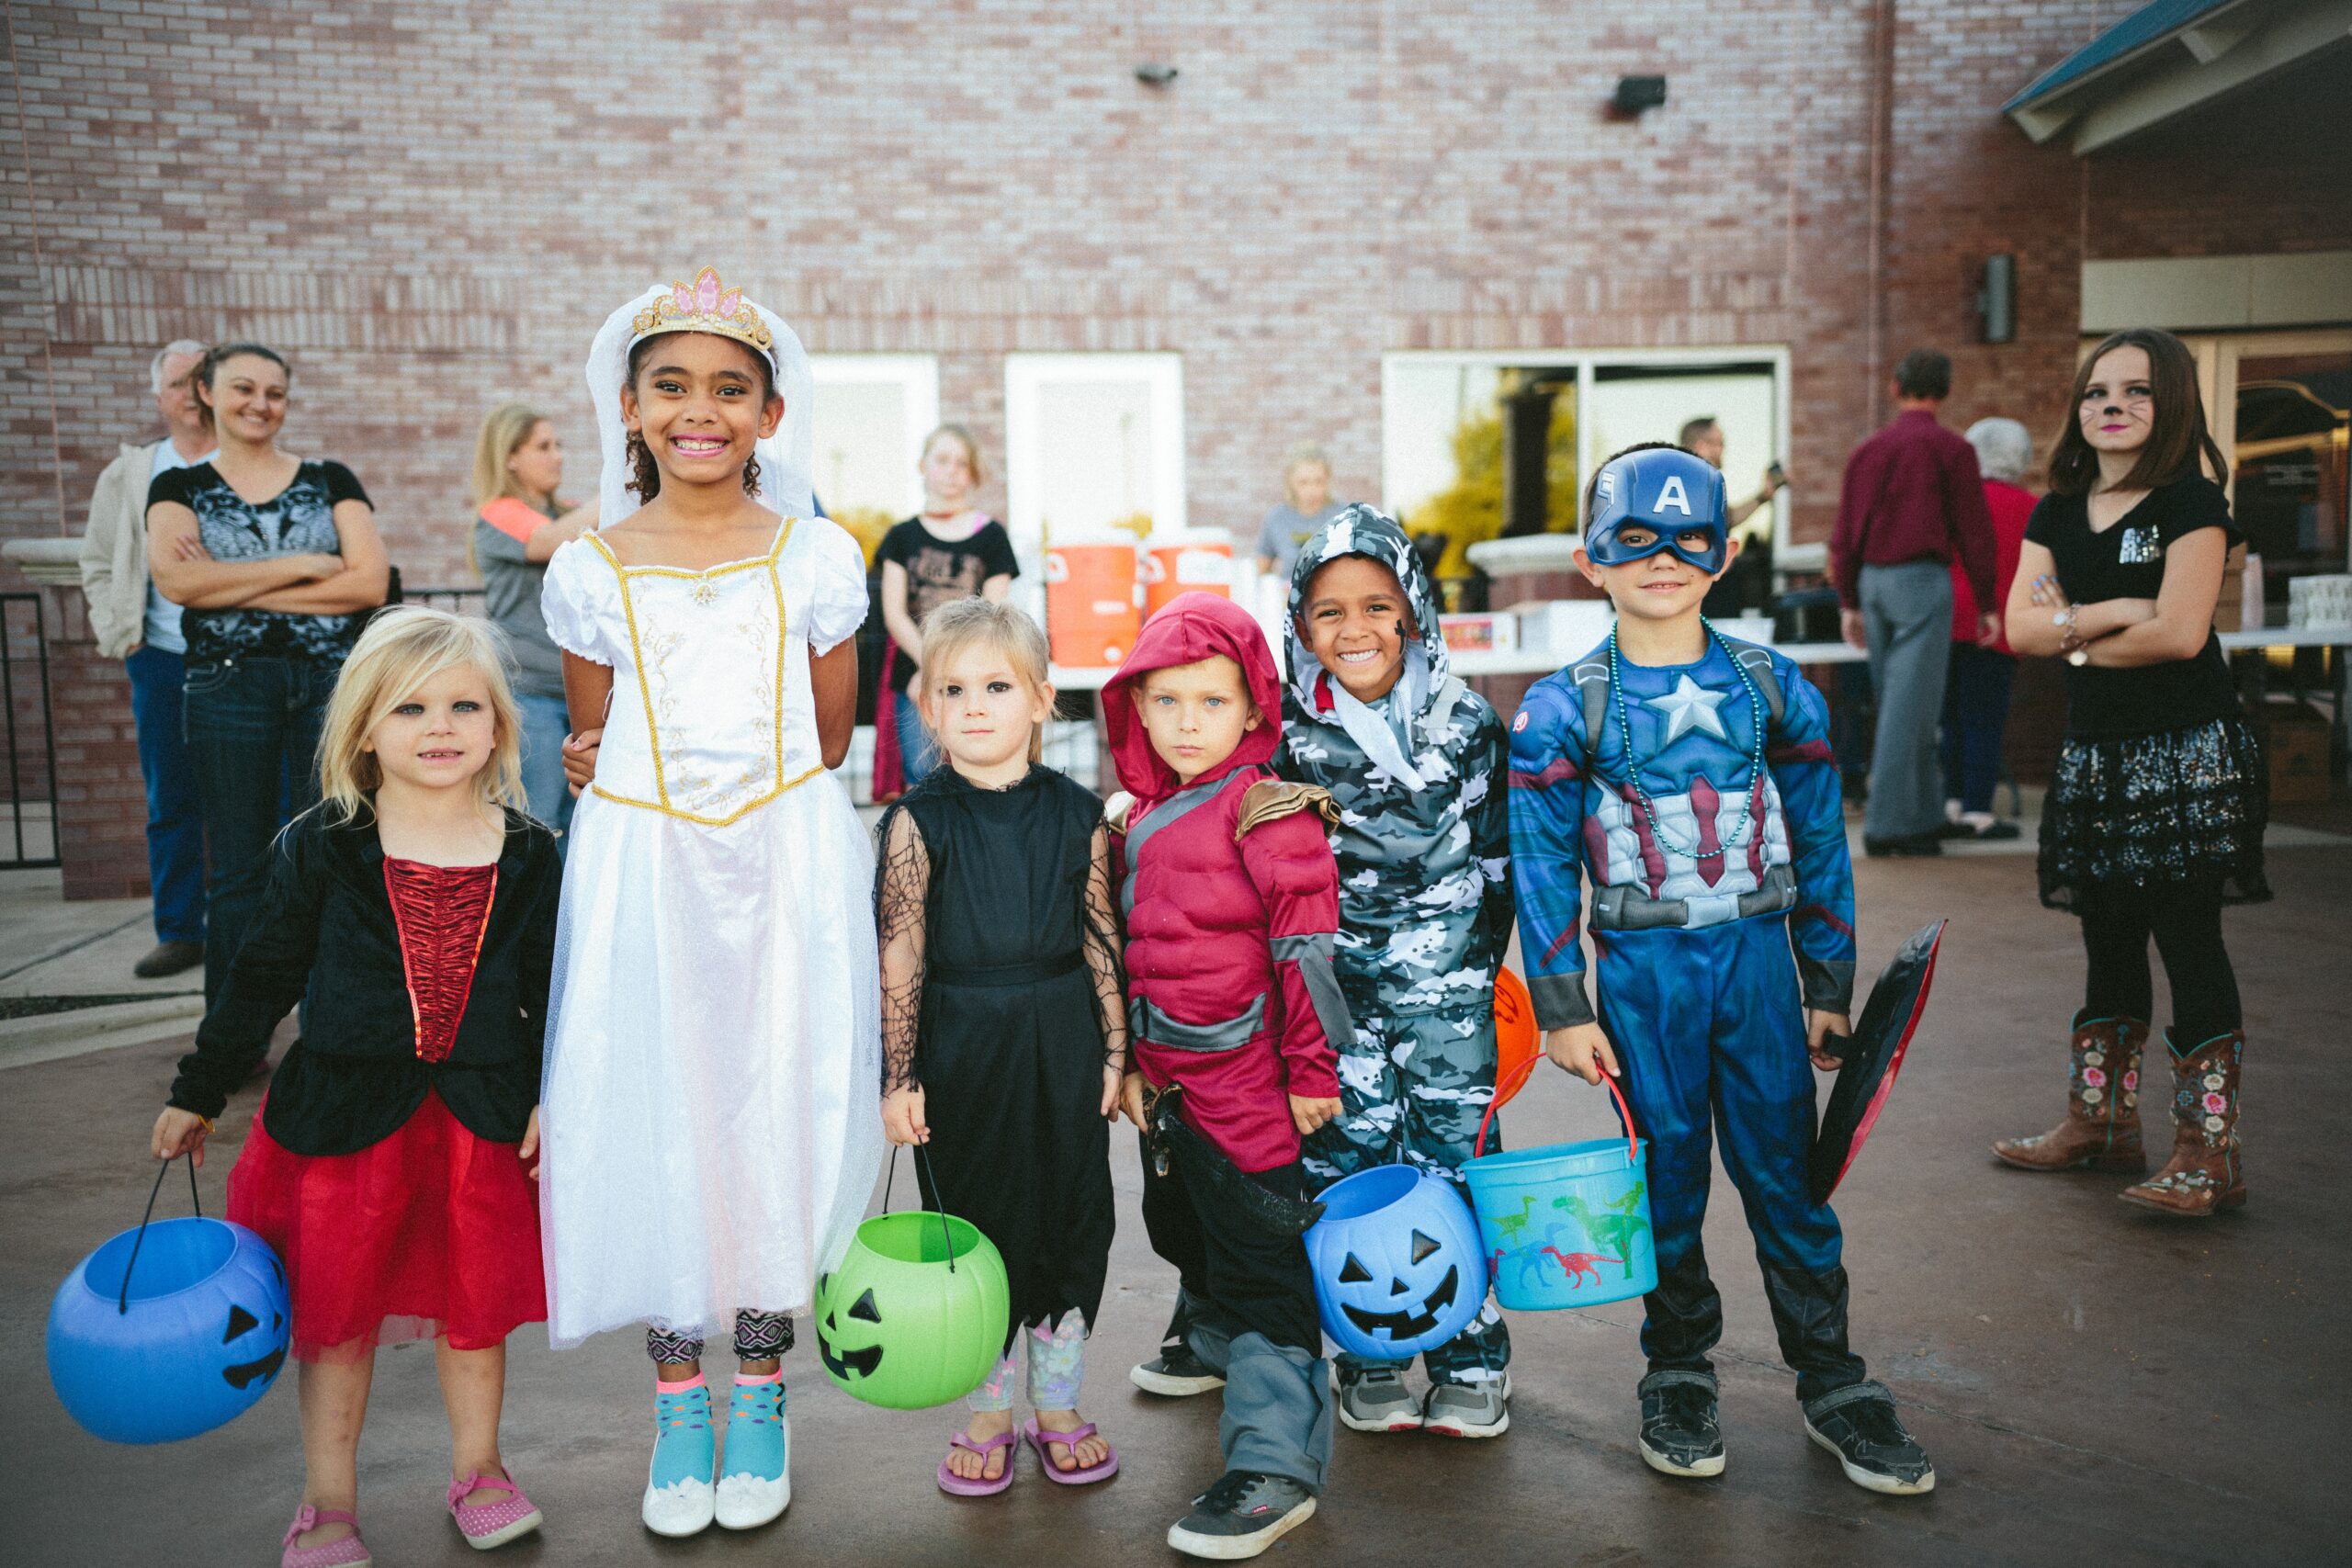 Display some of your favorite past or childhood costumes for a fashion Halloween aesthetic. Pictured: Kids in Halloween costumes.